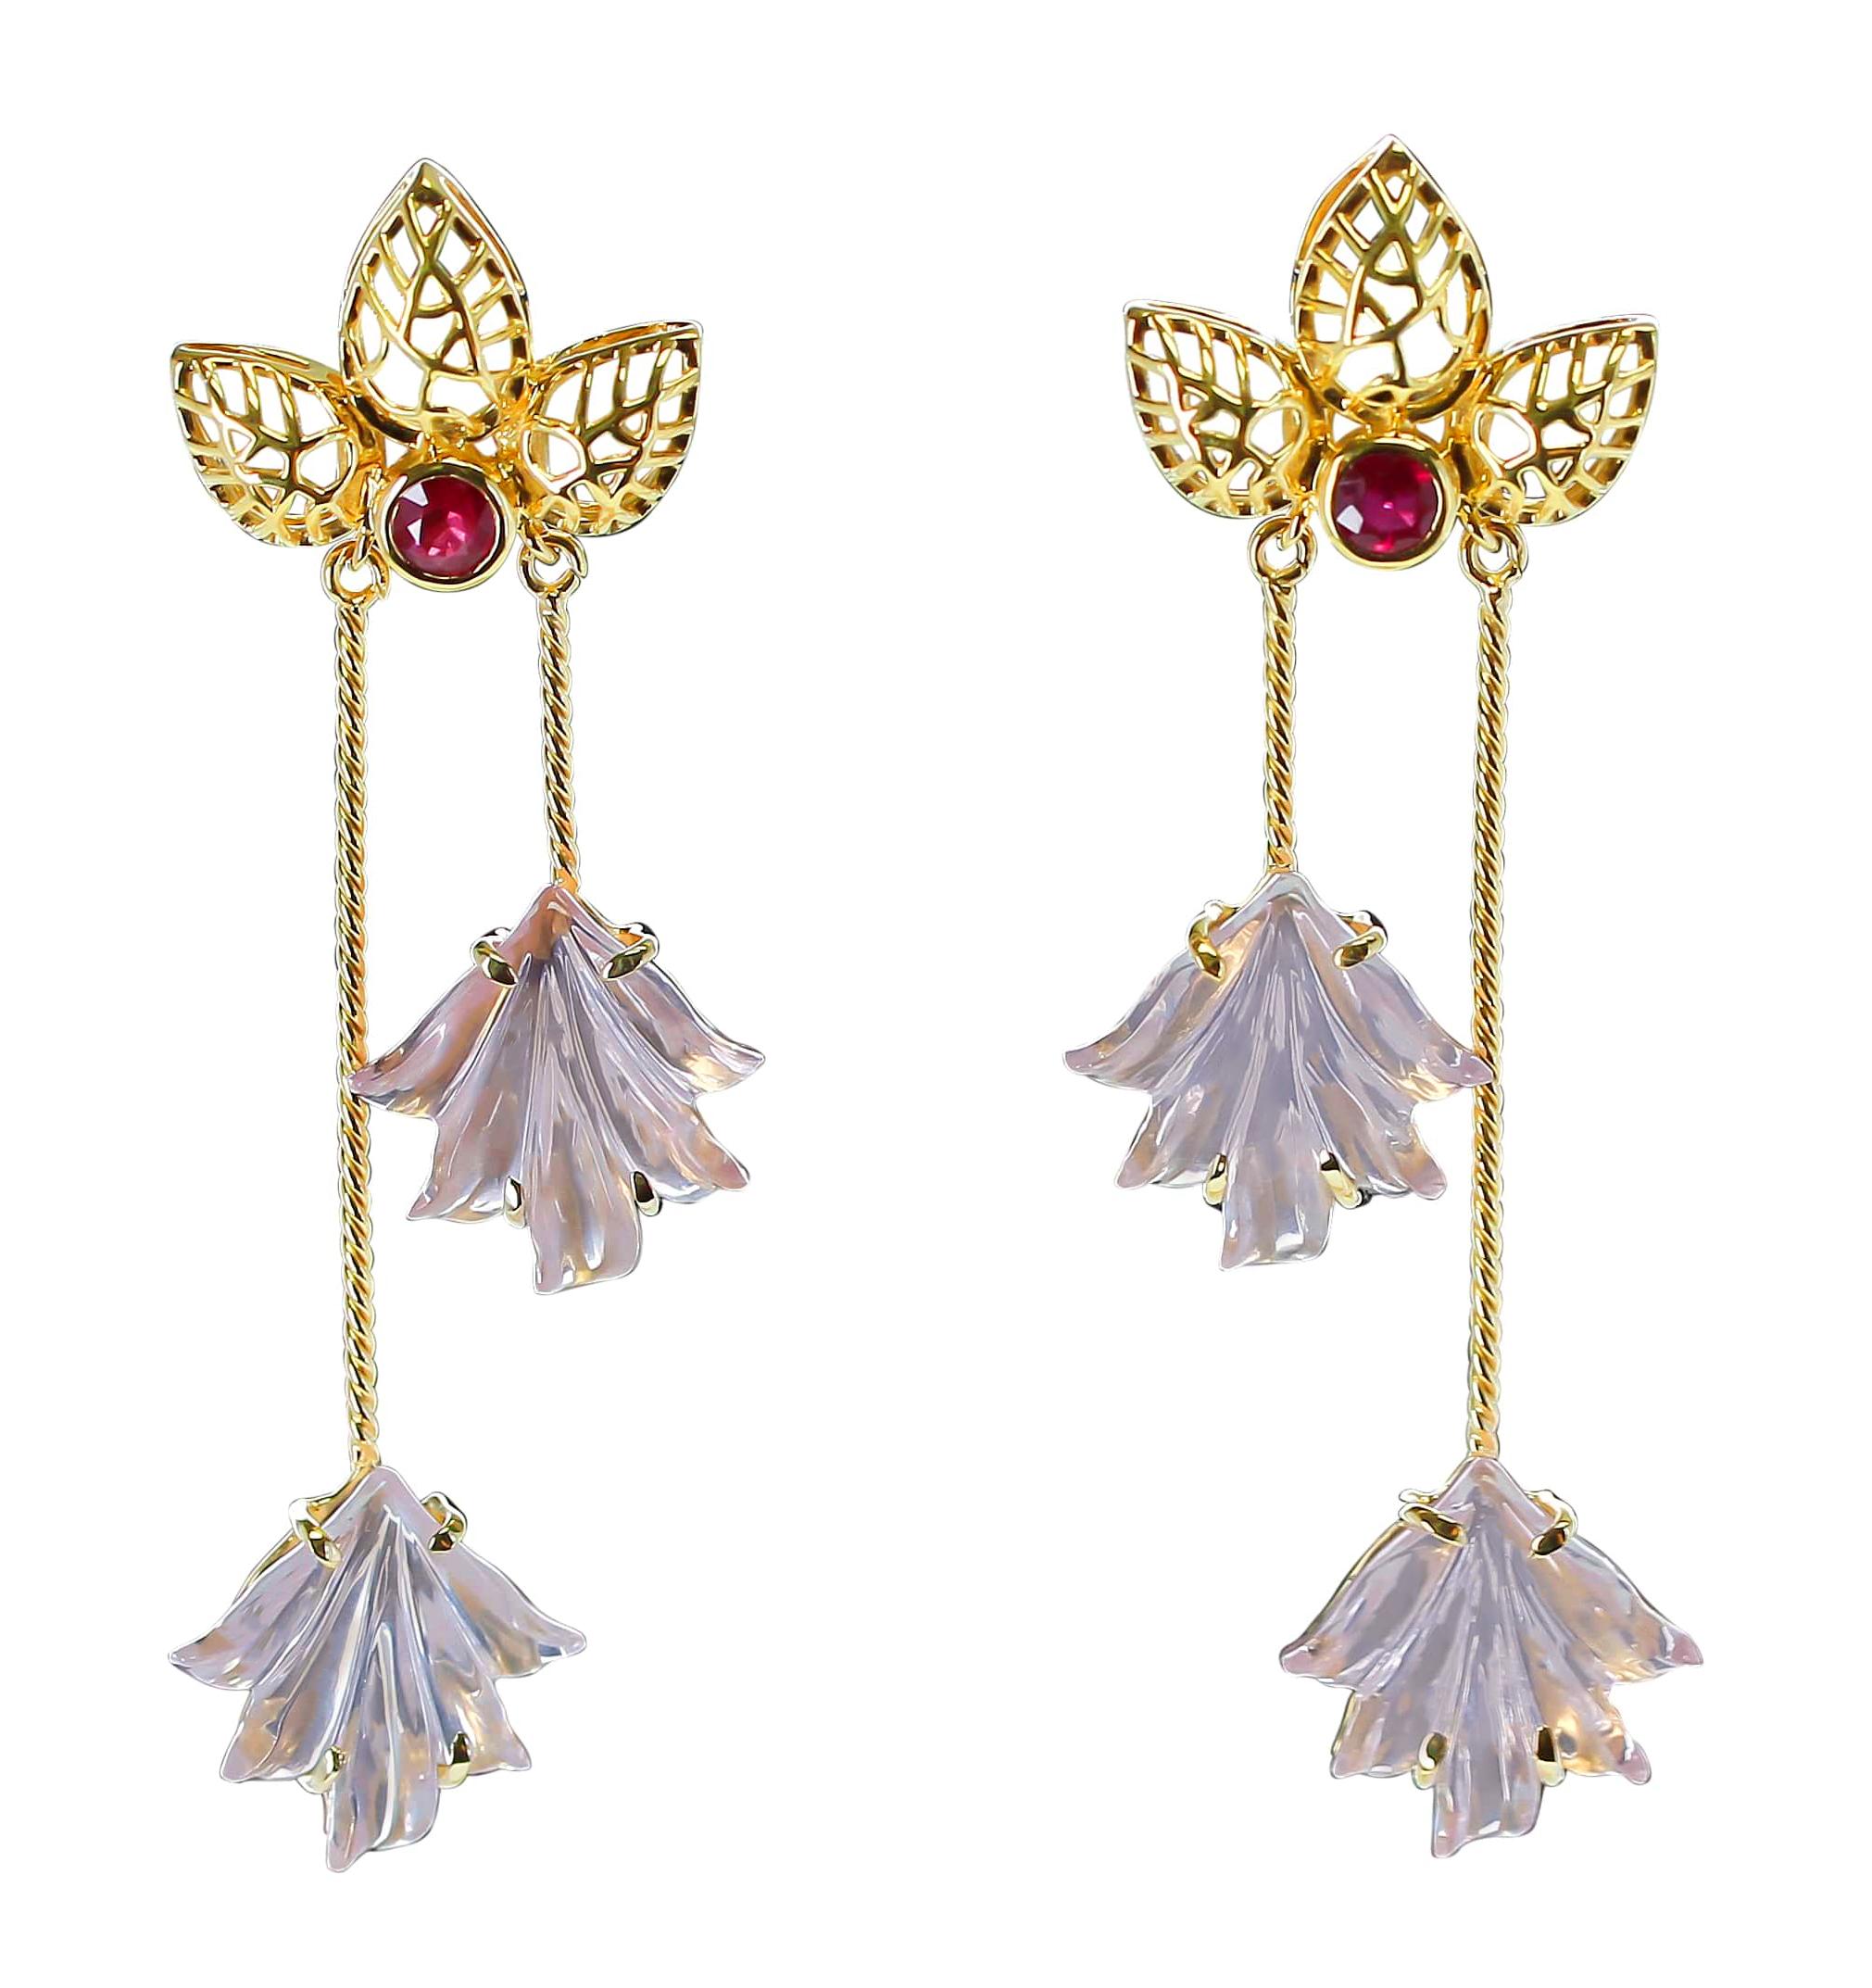 Round Cut Dual Carved Rose Quartz Earrings with Gold Leaf Work with Ruby